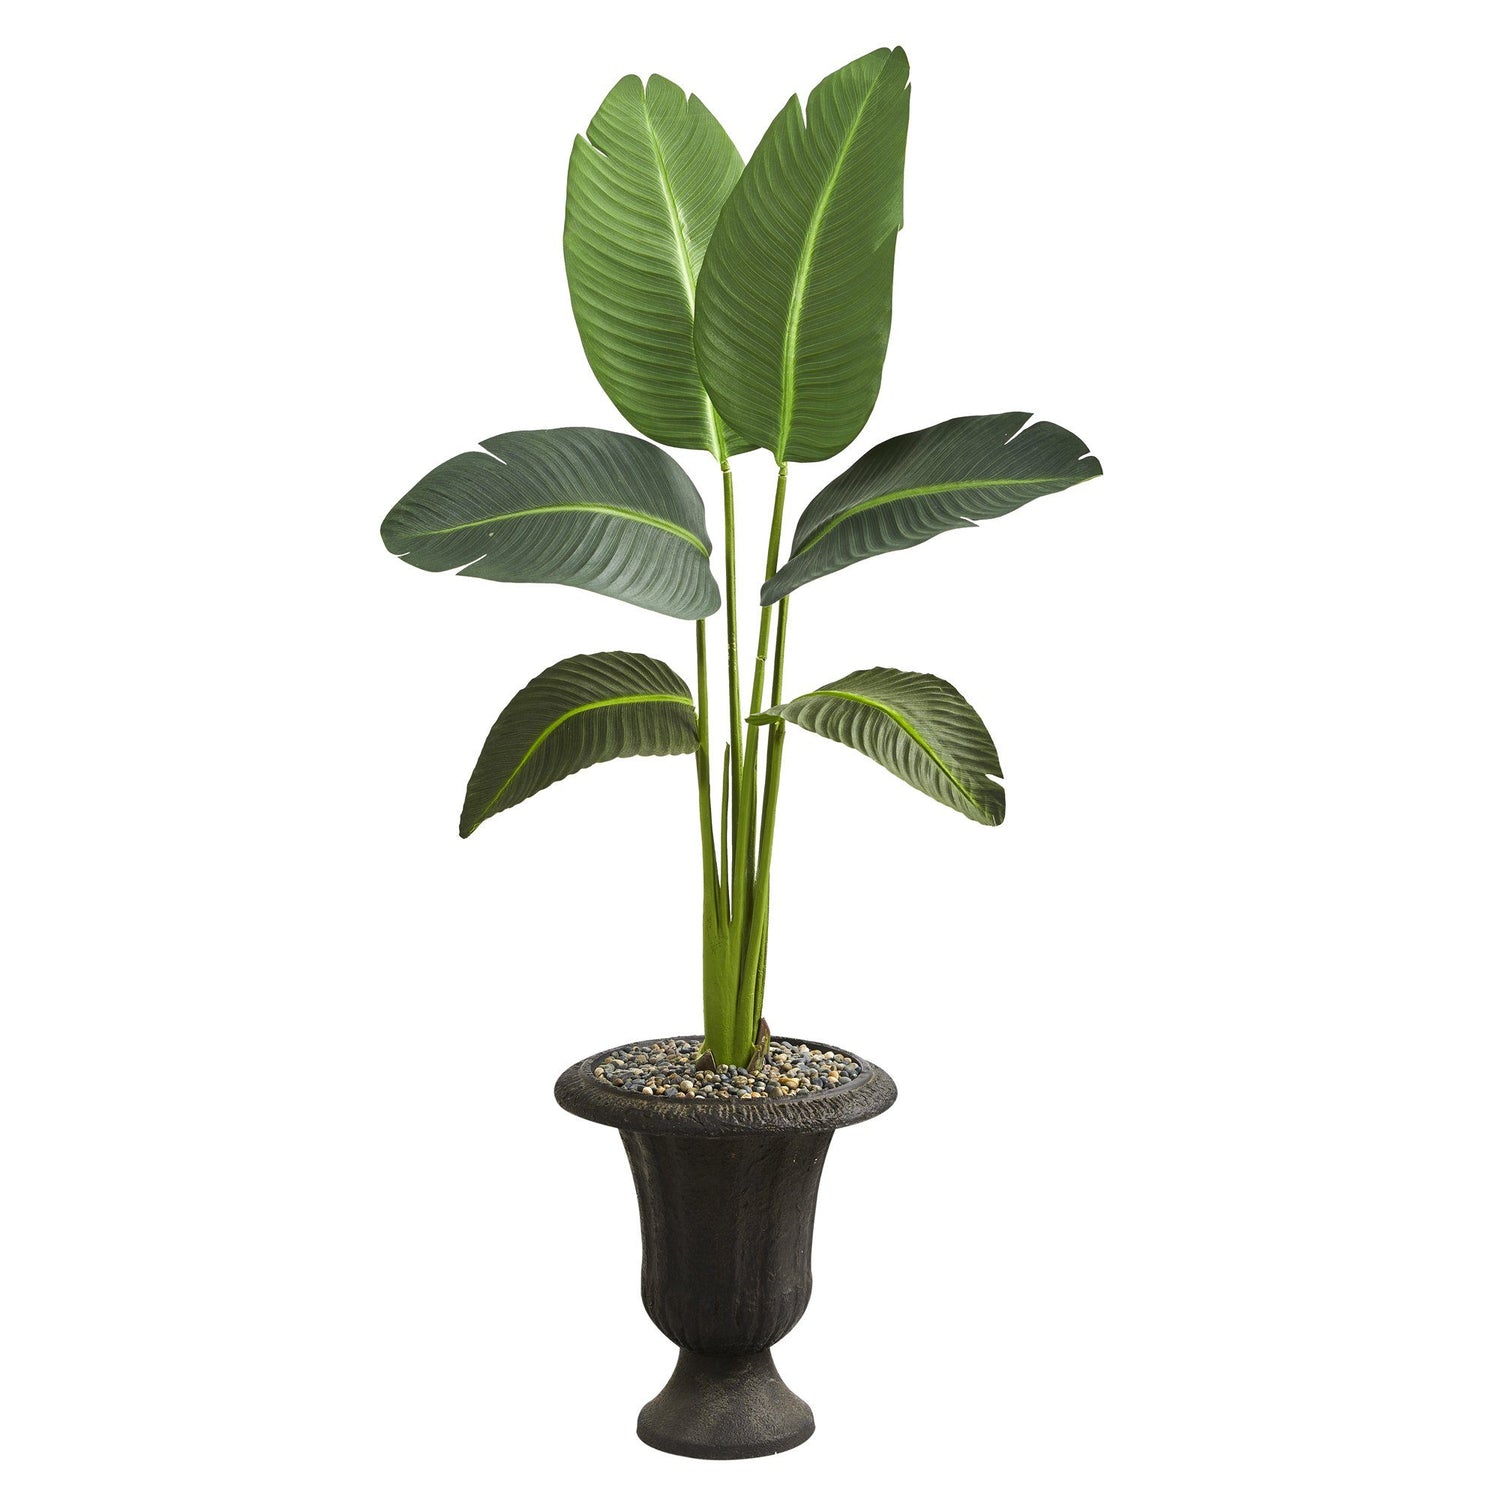 52” Traveler’s Palm Artificial Plant in Charcoal Urn (Real Touch)